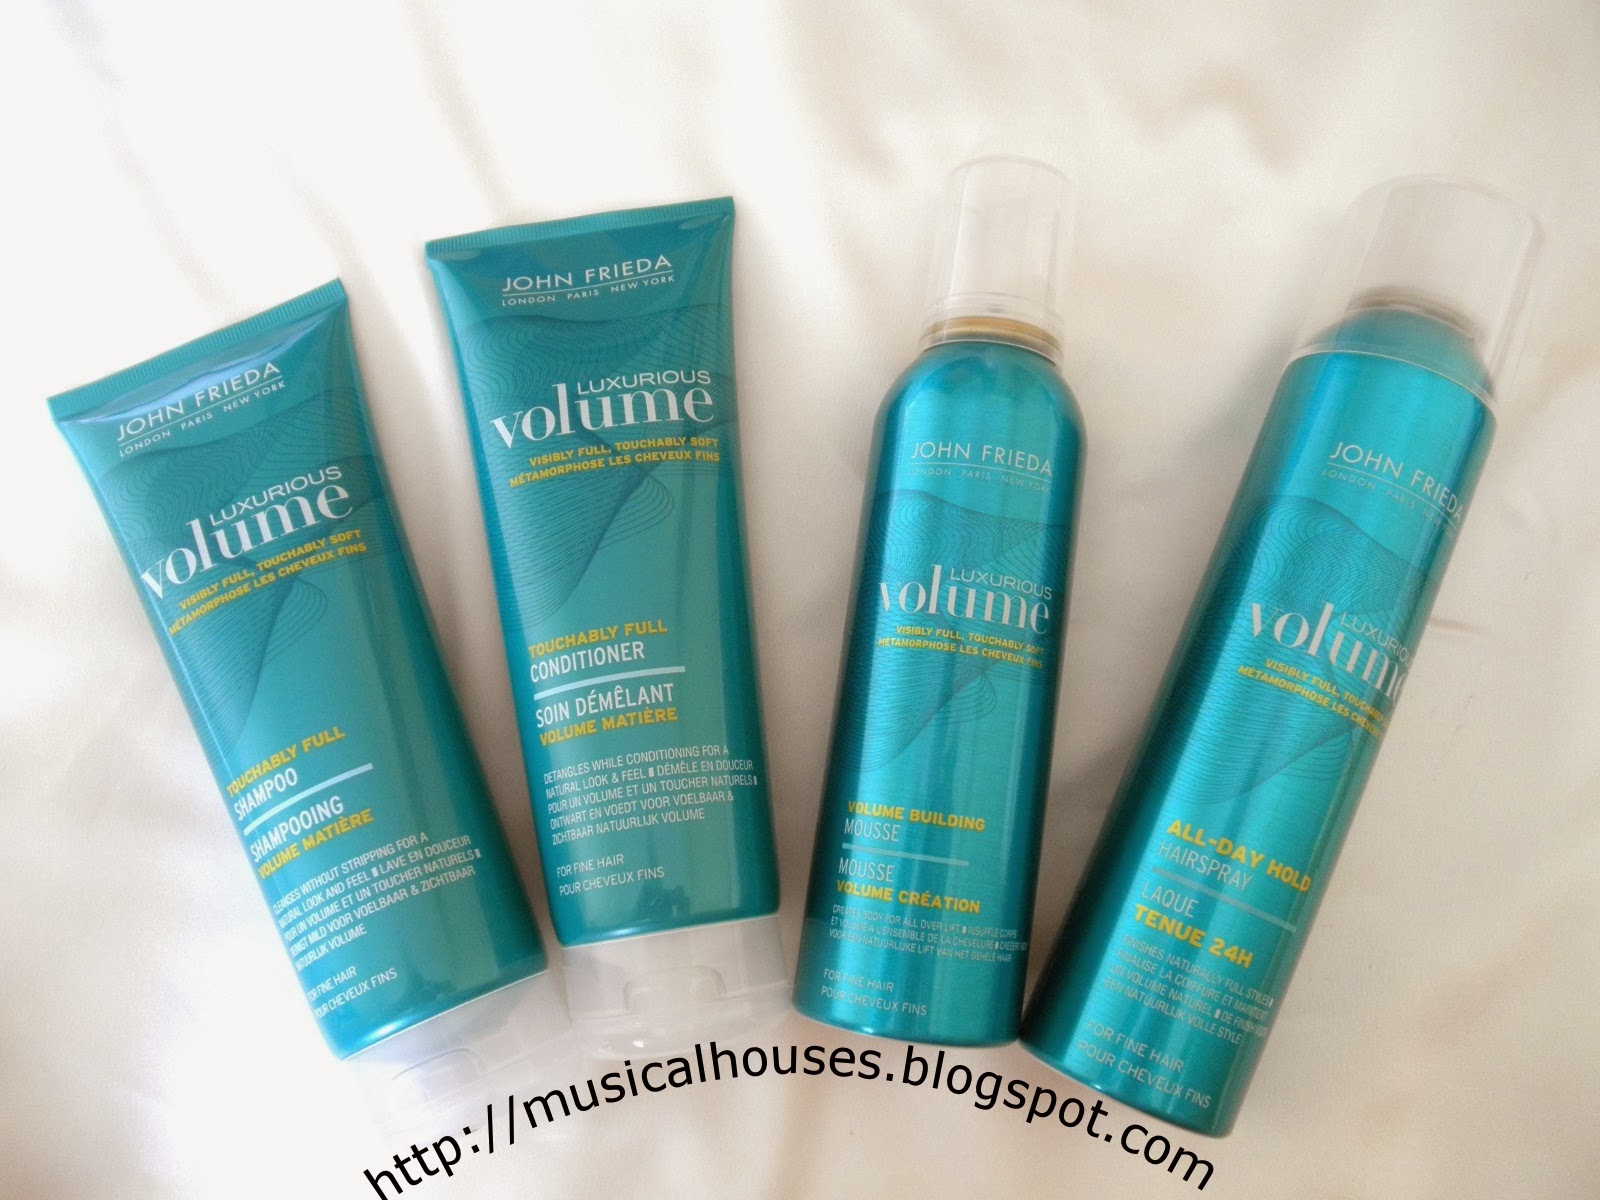 møde renere mangfoldighed John Frieda Luxurious Volume Review: Shampoo, Conditioner, Mousse,  Hairspray - of Faces and Fingers